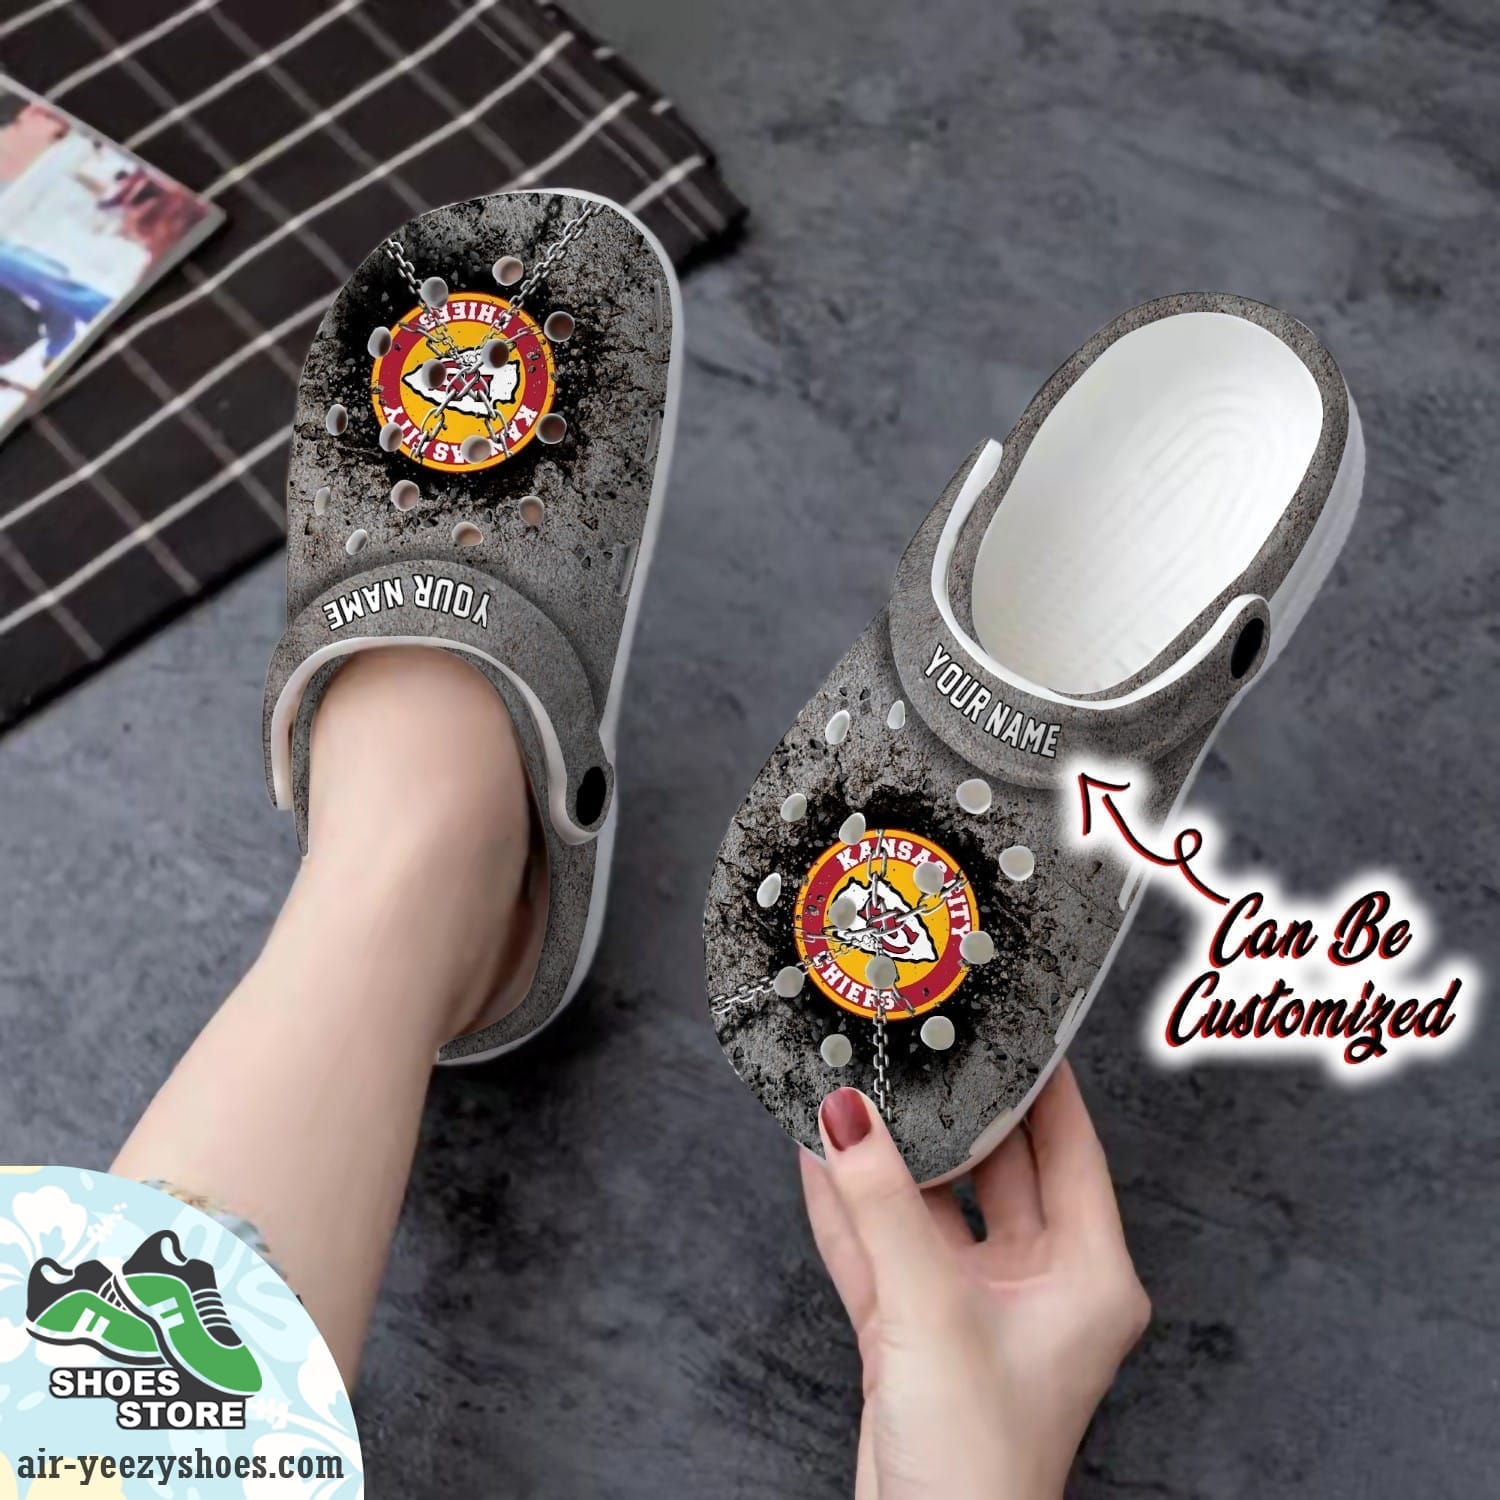 Kansas City Chiefs Personalized Chain Breaking Wall Clog Shoes, Football Crocs